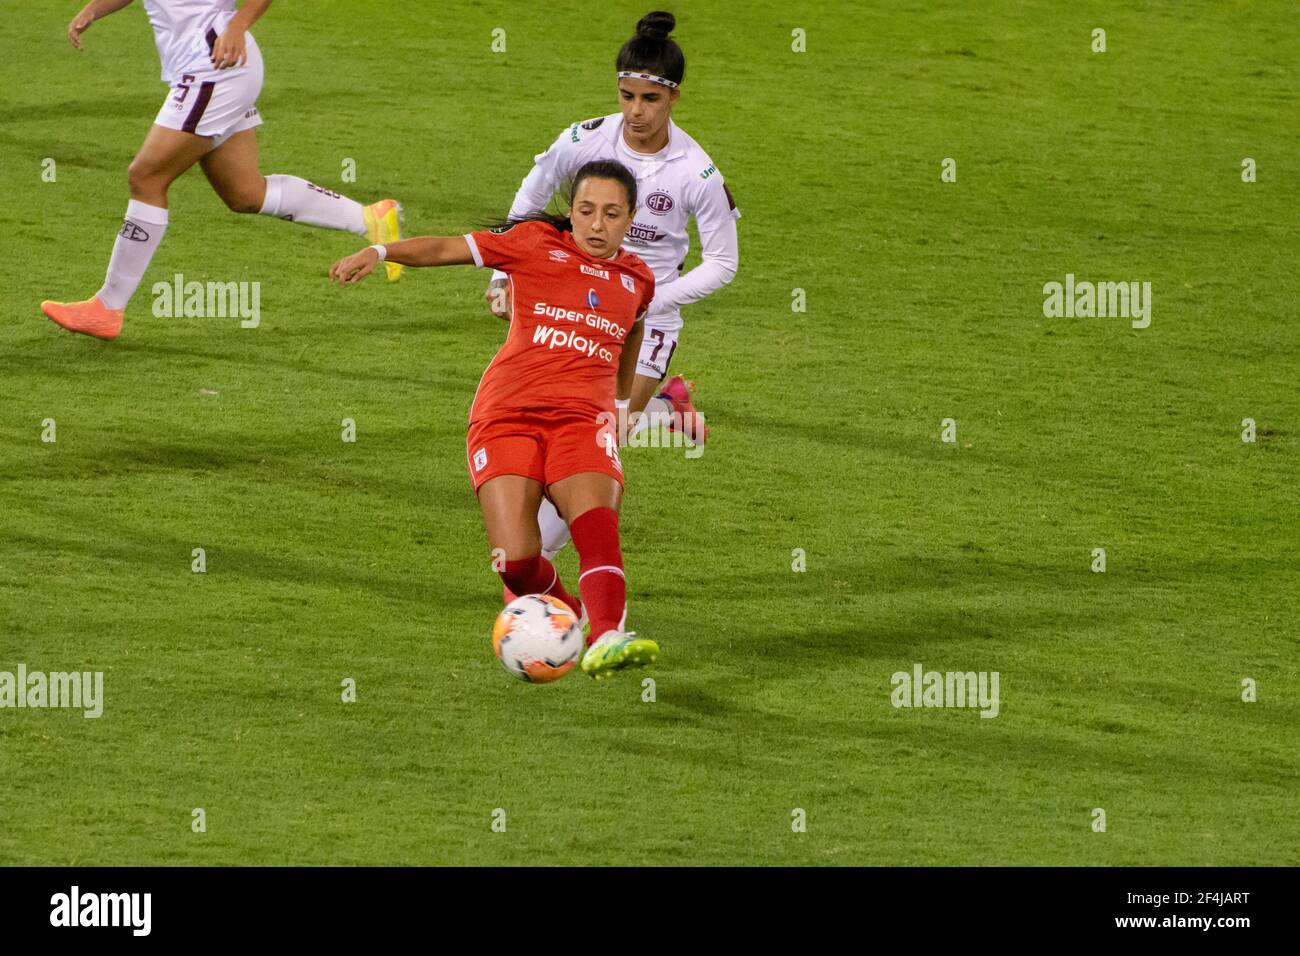 Buenos Aires, Argentina. 21st Mar, 2021. Sara Martinez (#15 America de Cali) during the game between America de Cali and Ferroviaria at Jose Amalfitani Stadium in Liniers, Buenos Aires, Argentina. Credit: SPP Sport Press Photo. /Alamy Live News Stock Photo